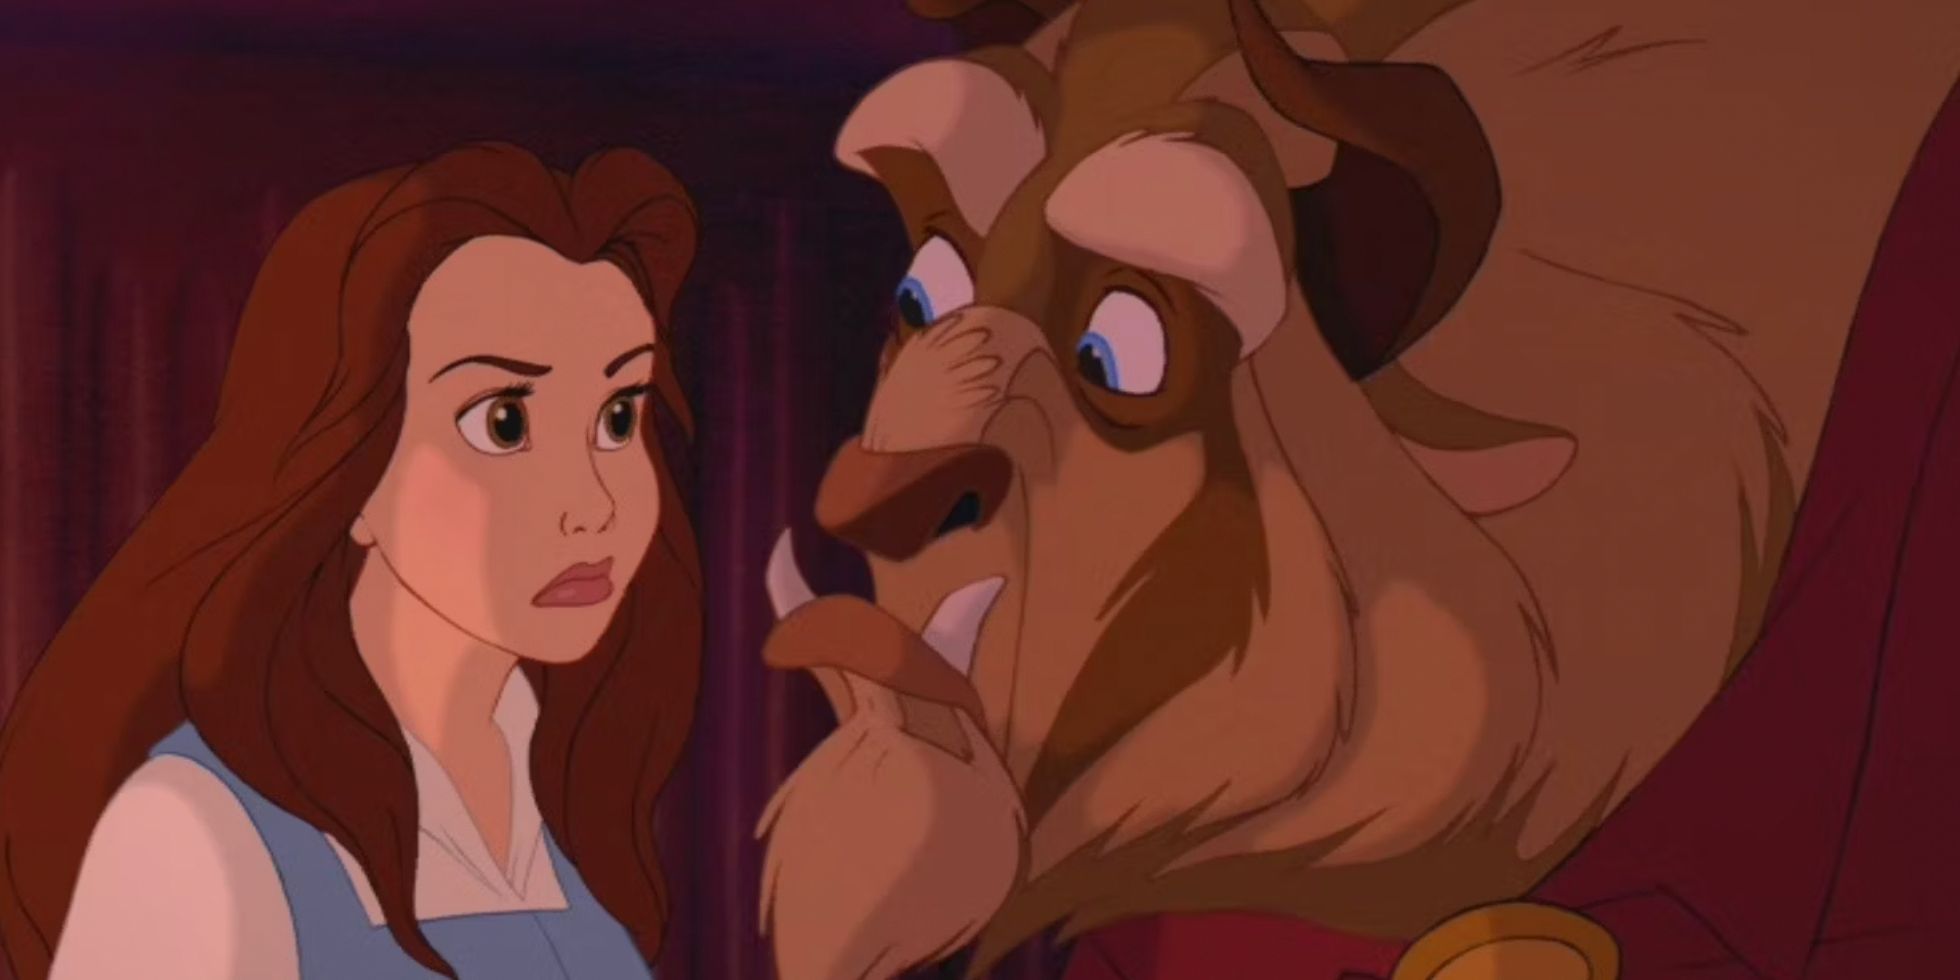 Belle is angry with the Beast in Beauty and the Beast